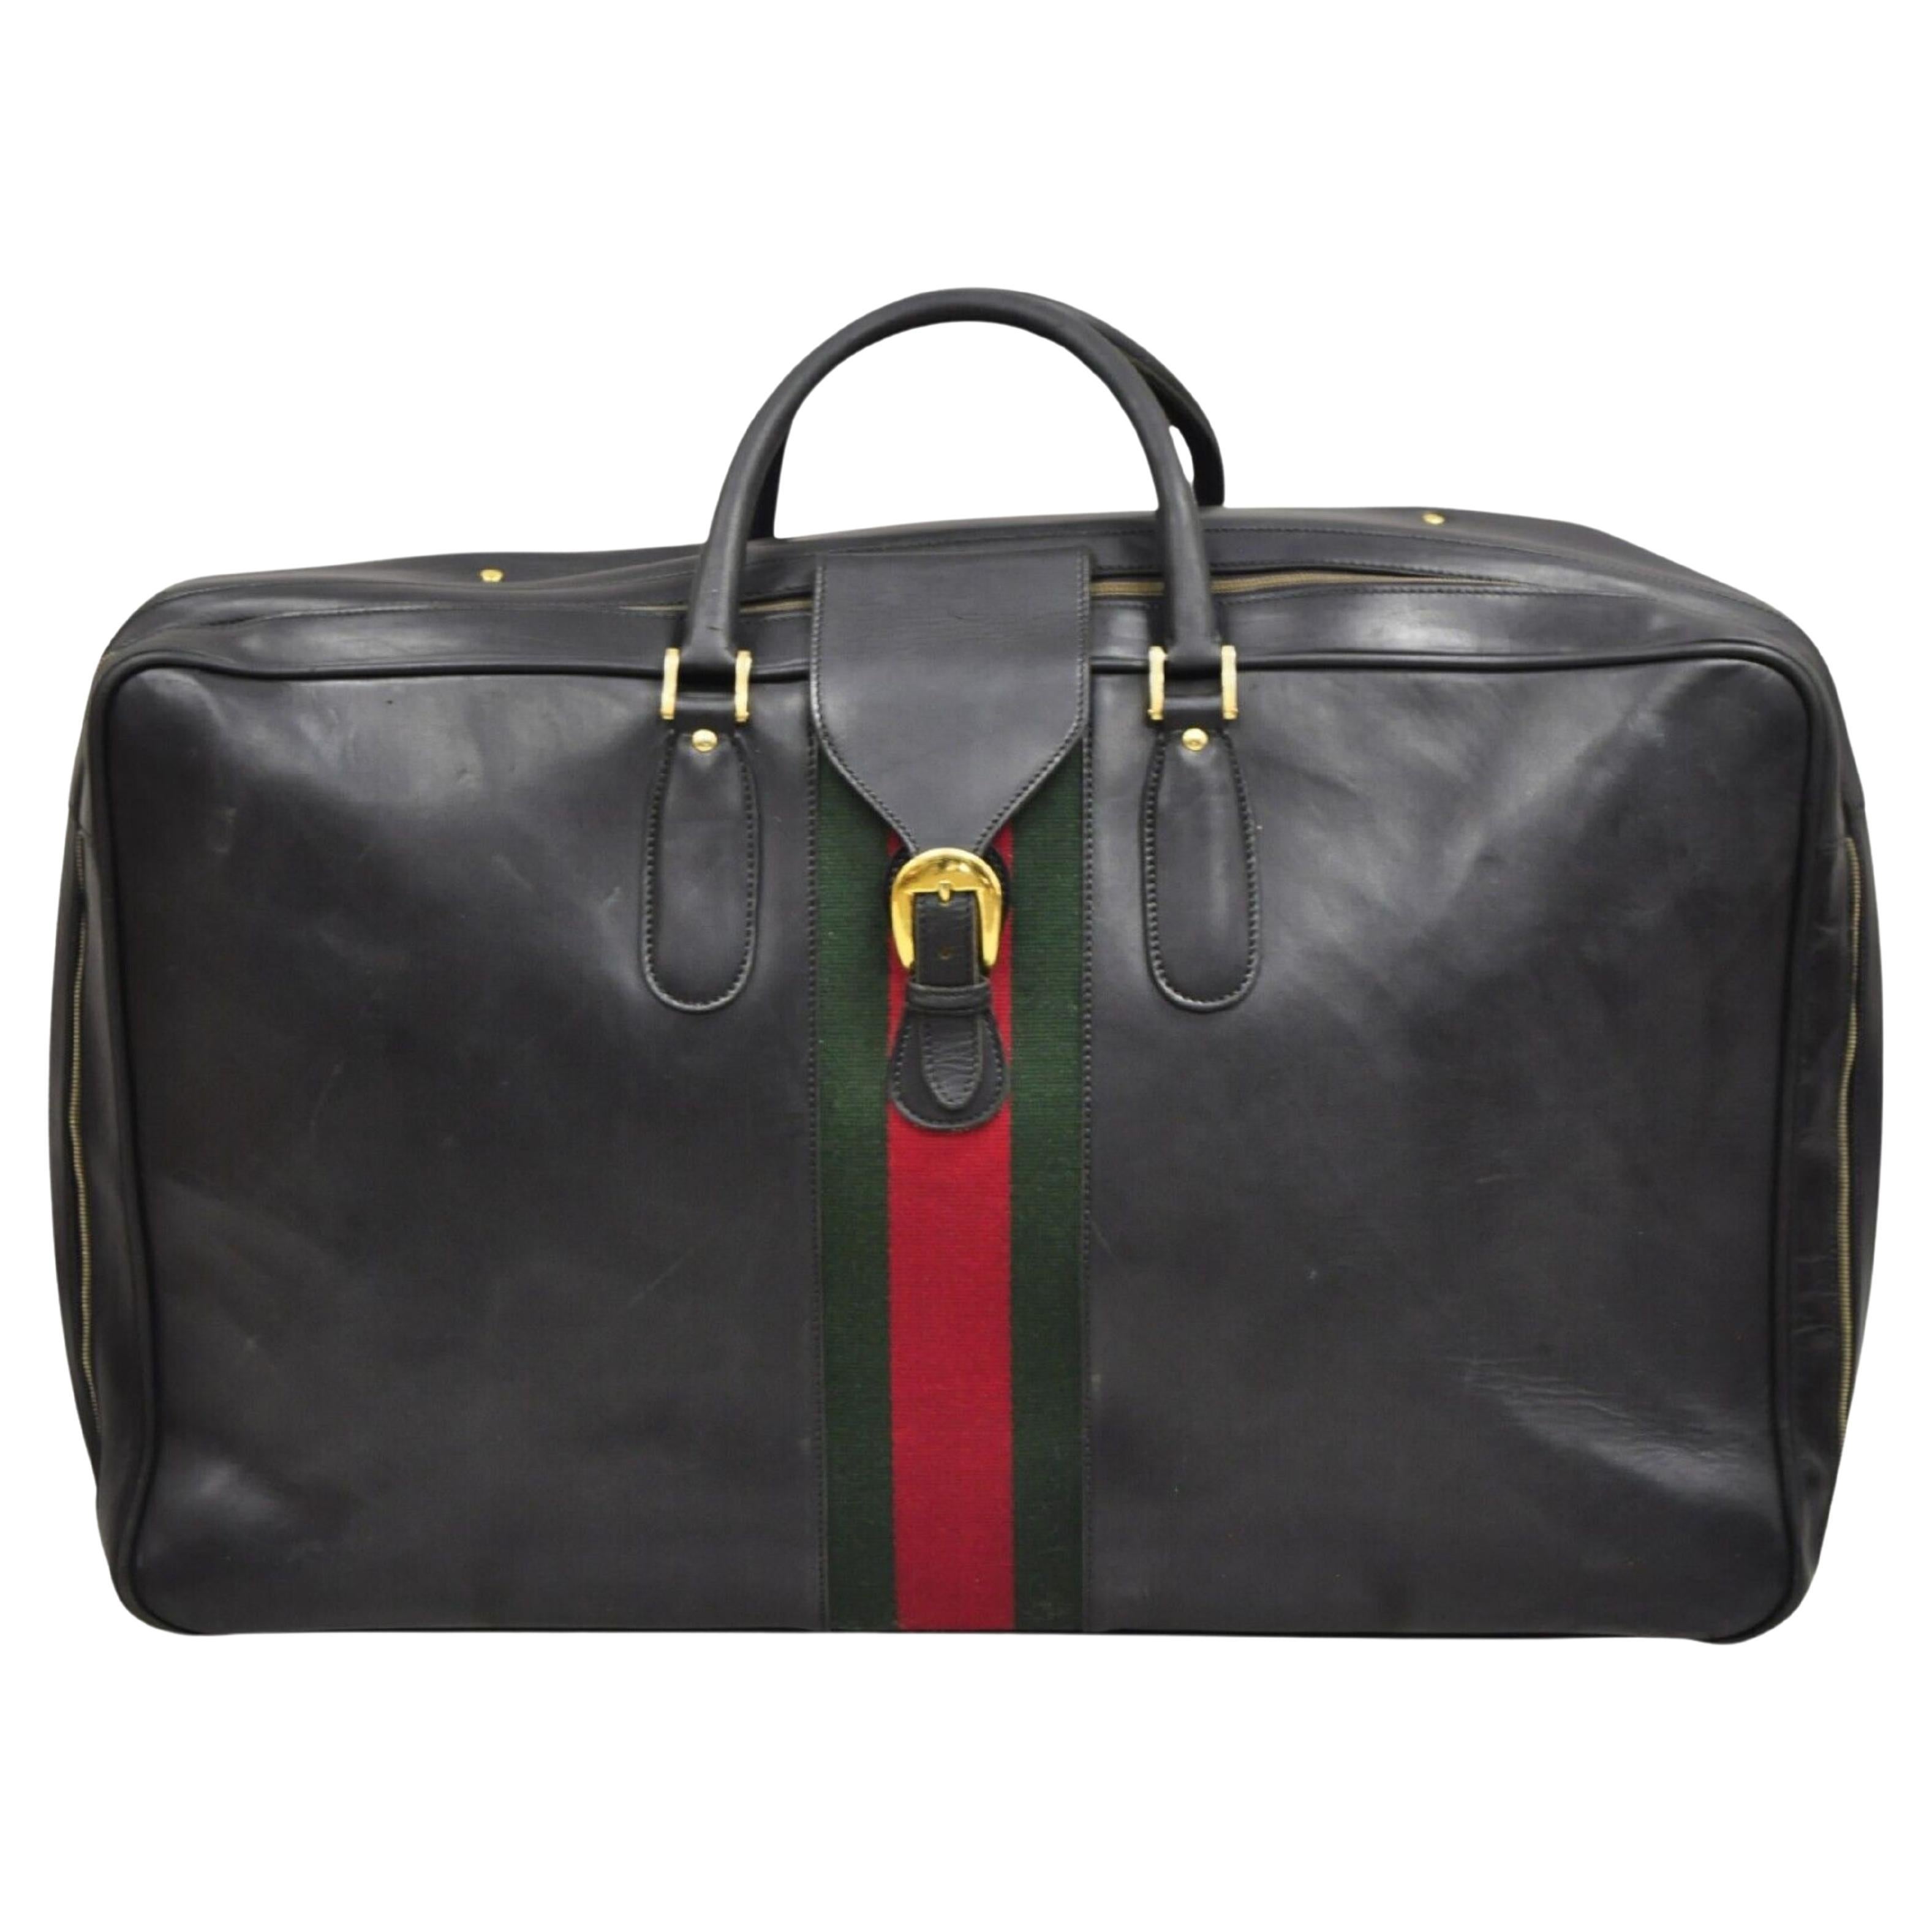 Vintage Gucci Large Black Leather Suitcase Luggage Travel Bag Green Red Webbing For Sale